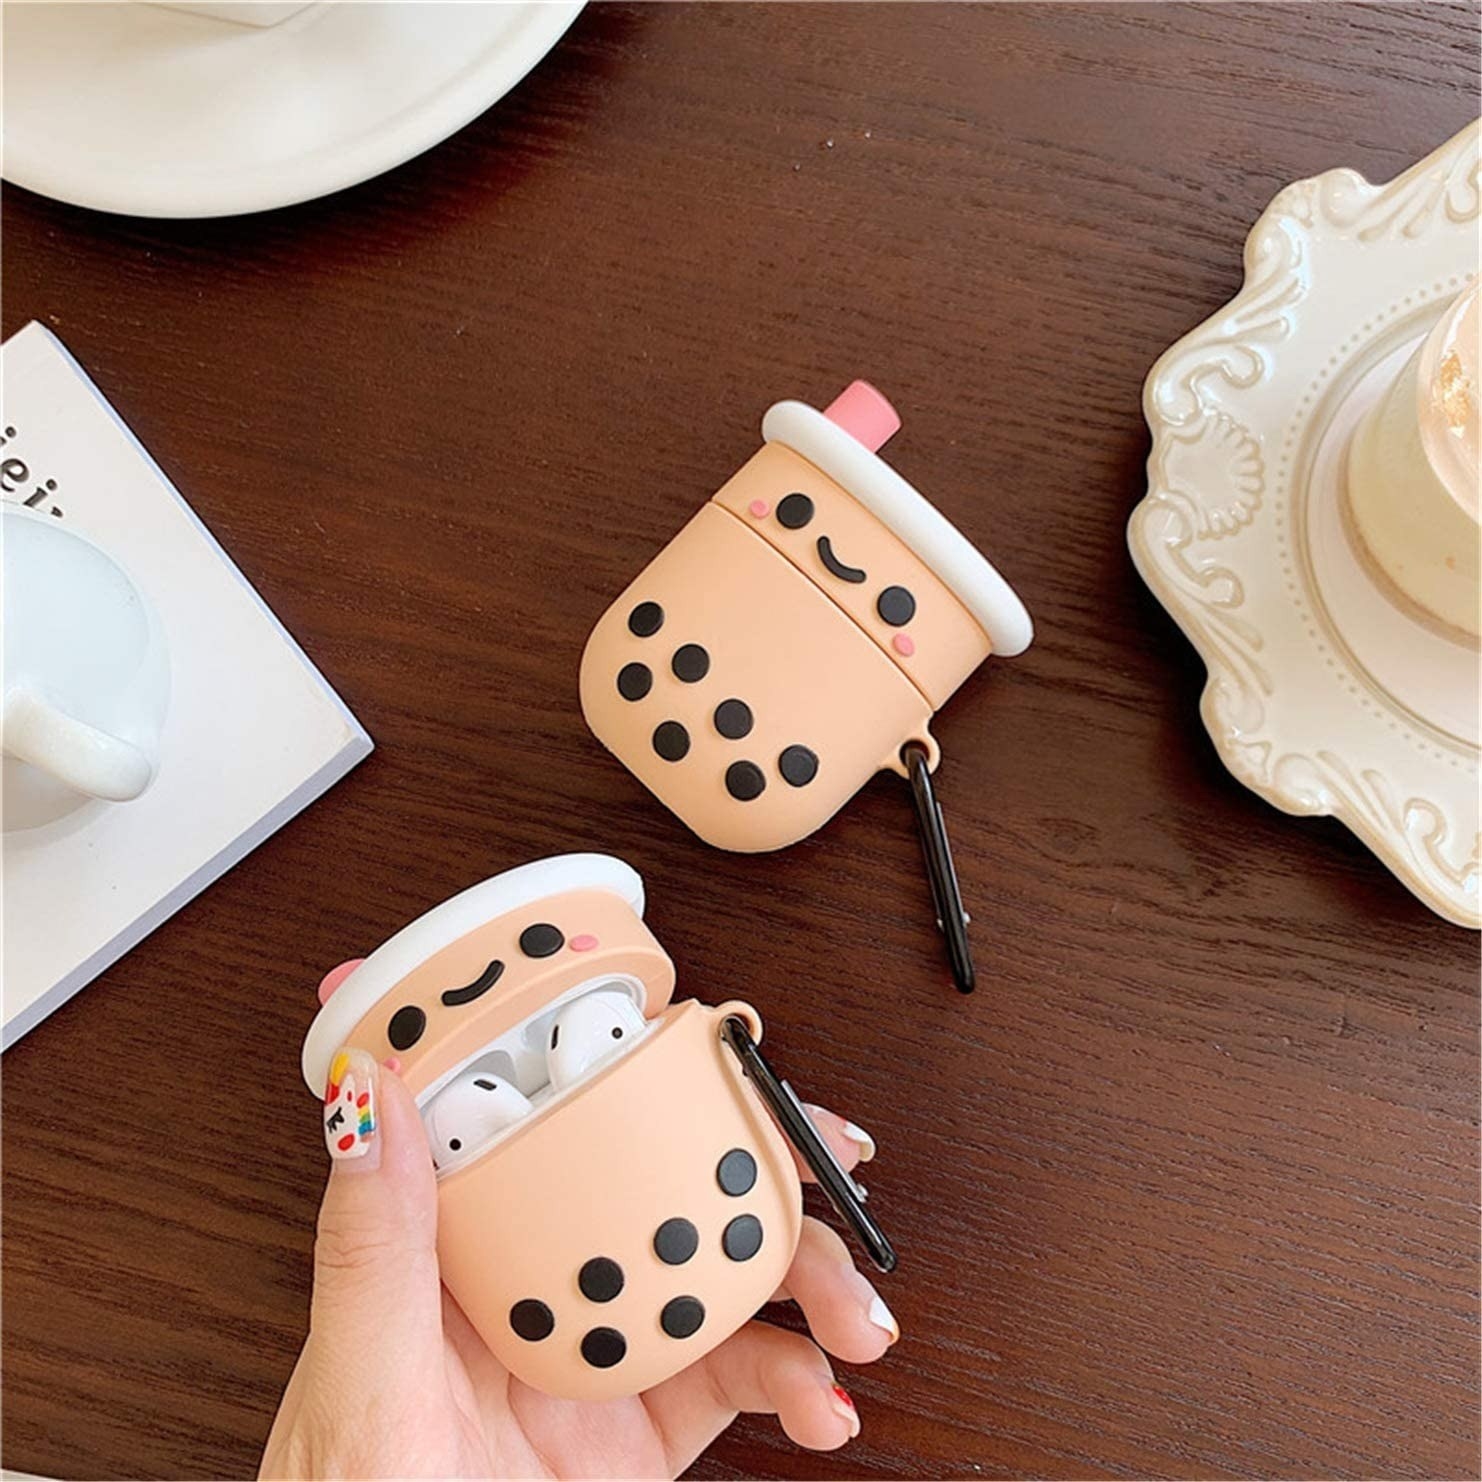 hand holding boba tea-shaped cute AirPods case